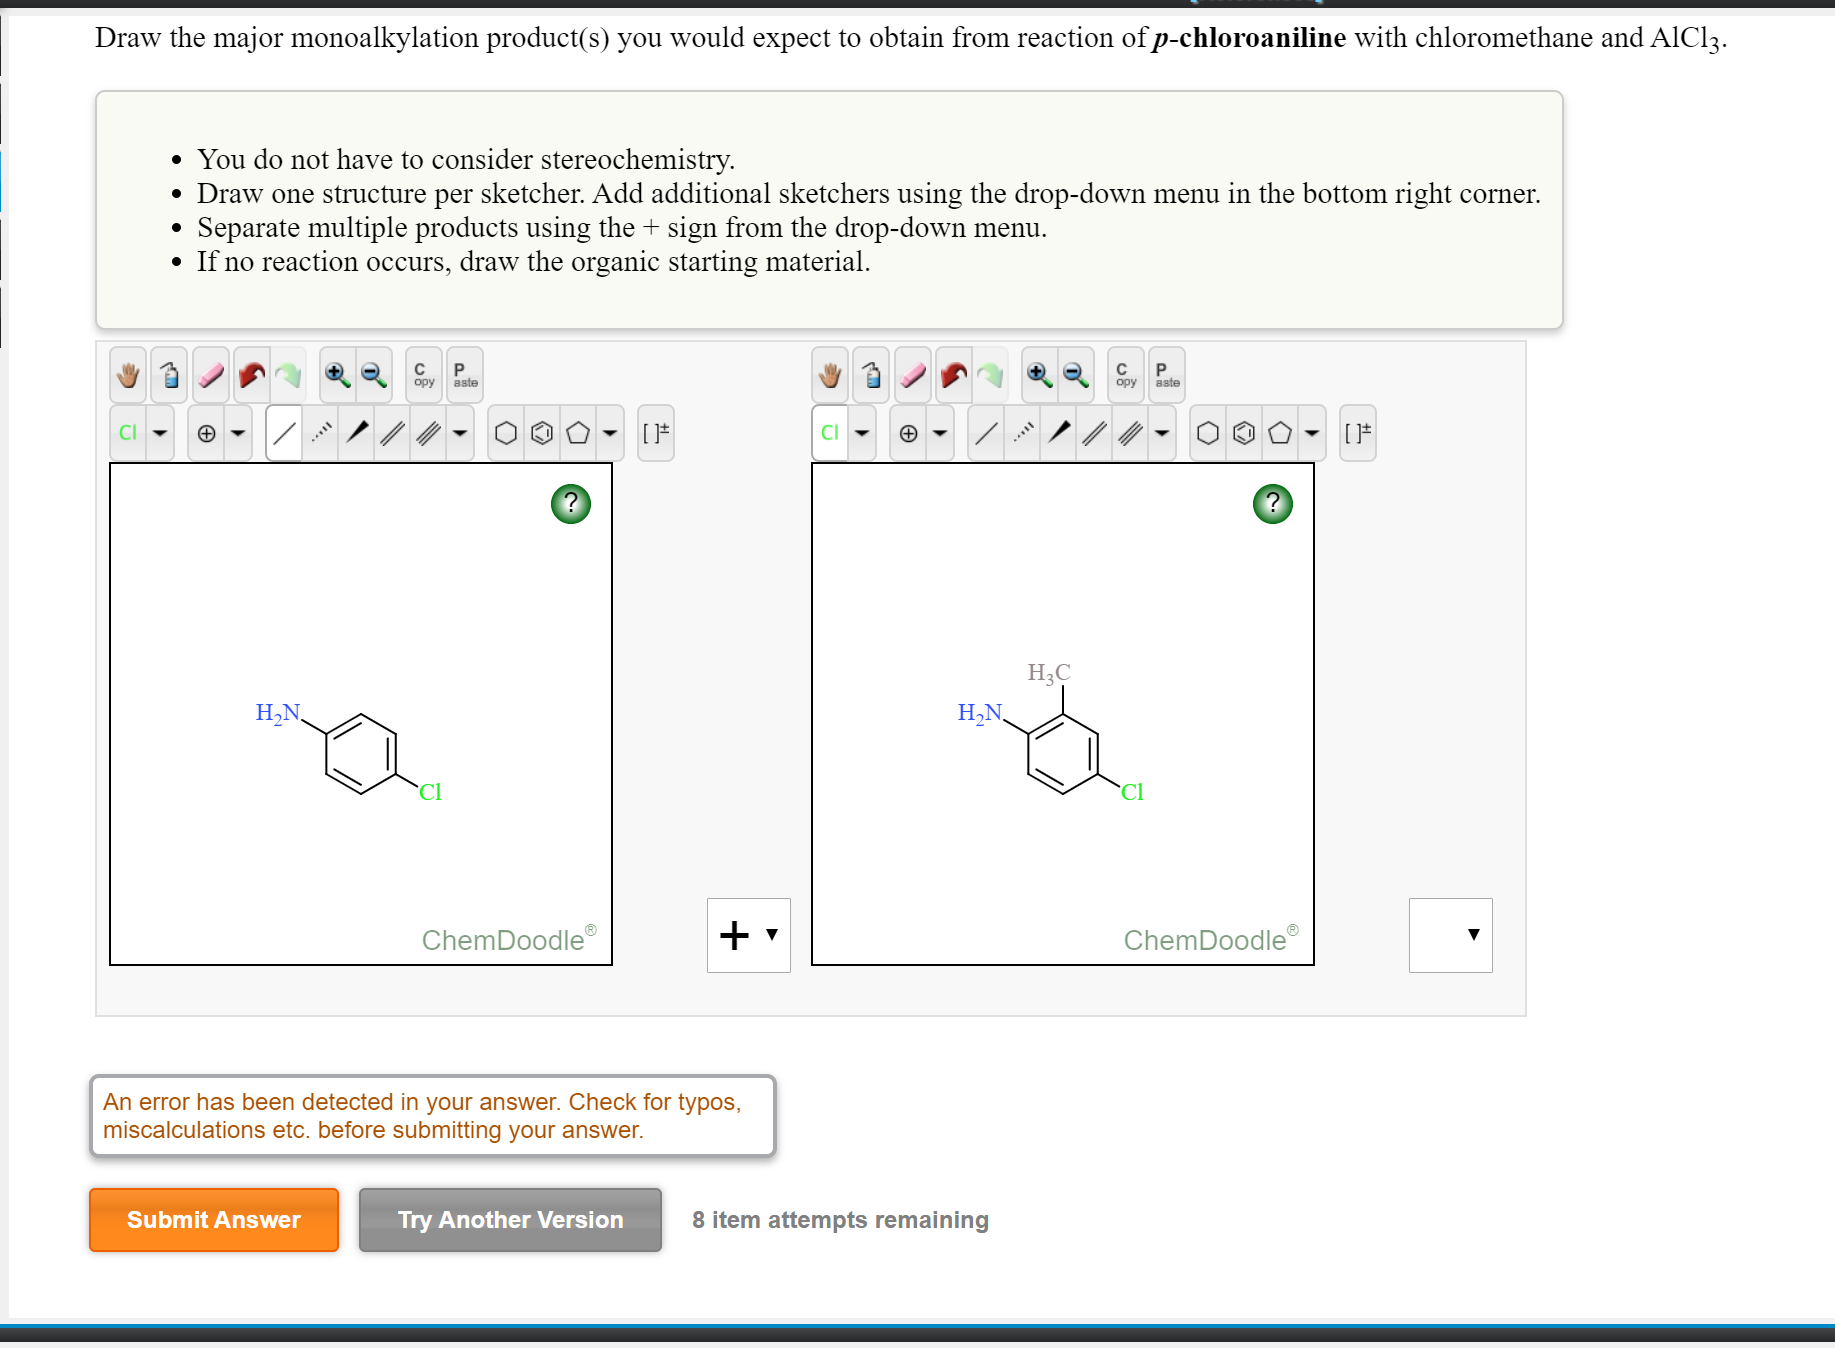 Draw the major monoalkylation product(s) you would expect to obtain from reaction of p-chloroaniline with chloromethane and AlCl3.
• You do not have to consider stereochemistry.
• Draw one structure per sketcher. Add additional sketchers using the drop-down menu in the bottom right corner.
Separate multiple products using the + sign from the drop-down menu.
• If no reaction occurs, draw the organic starting material.
opy
aste
opy
aste
CI
Нас
H,N,
Н.N,
Cl
Cl
ChemDoodle
ChemDoodle
An error has been detected in your answer. Check for typos,
miscalculations etc. before submitting your answer.
Submit Answer
Try Another Version
8 item attempts remaining
